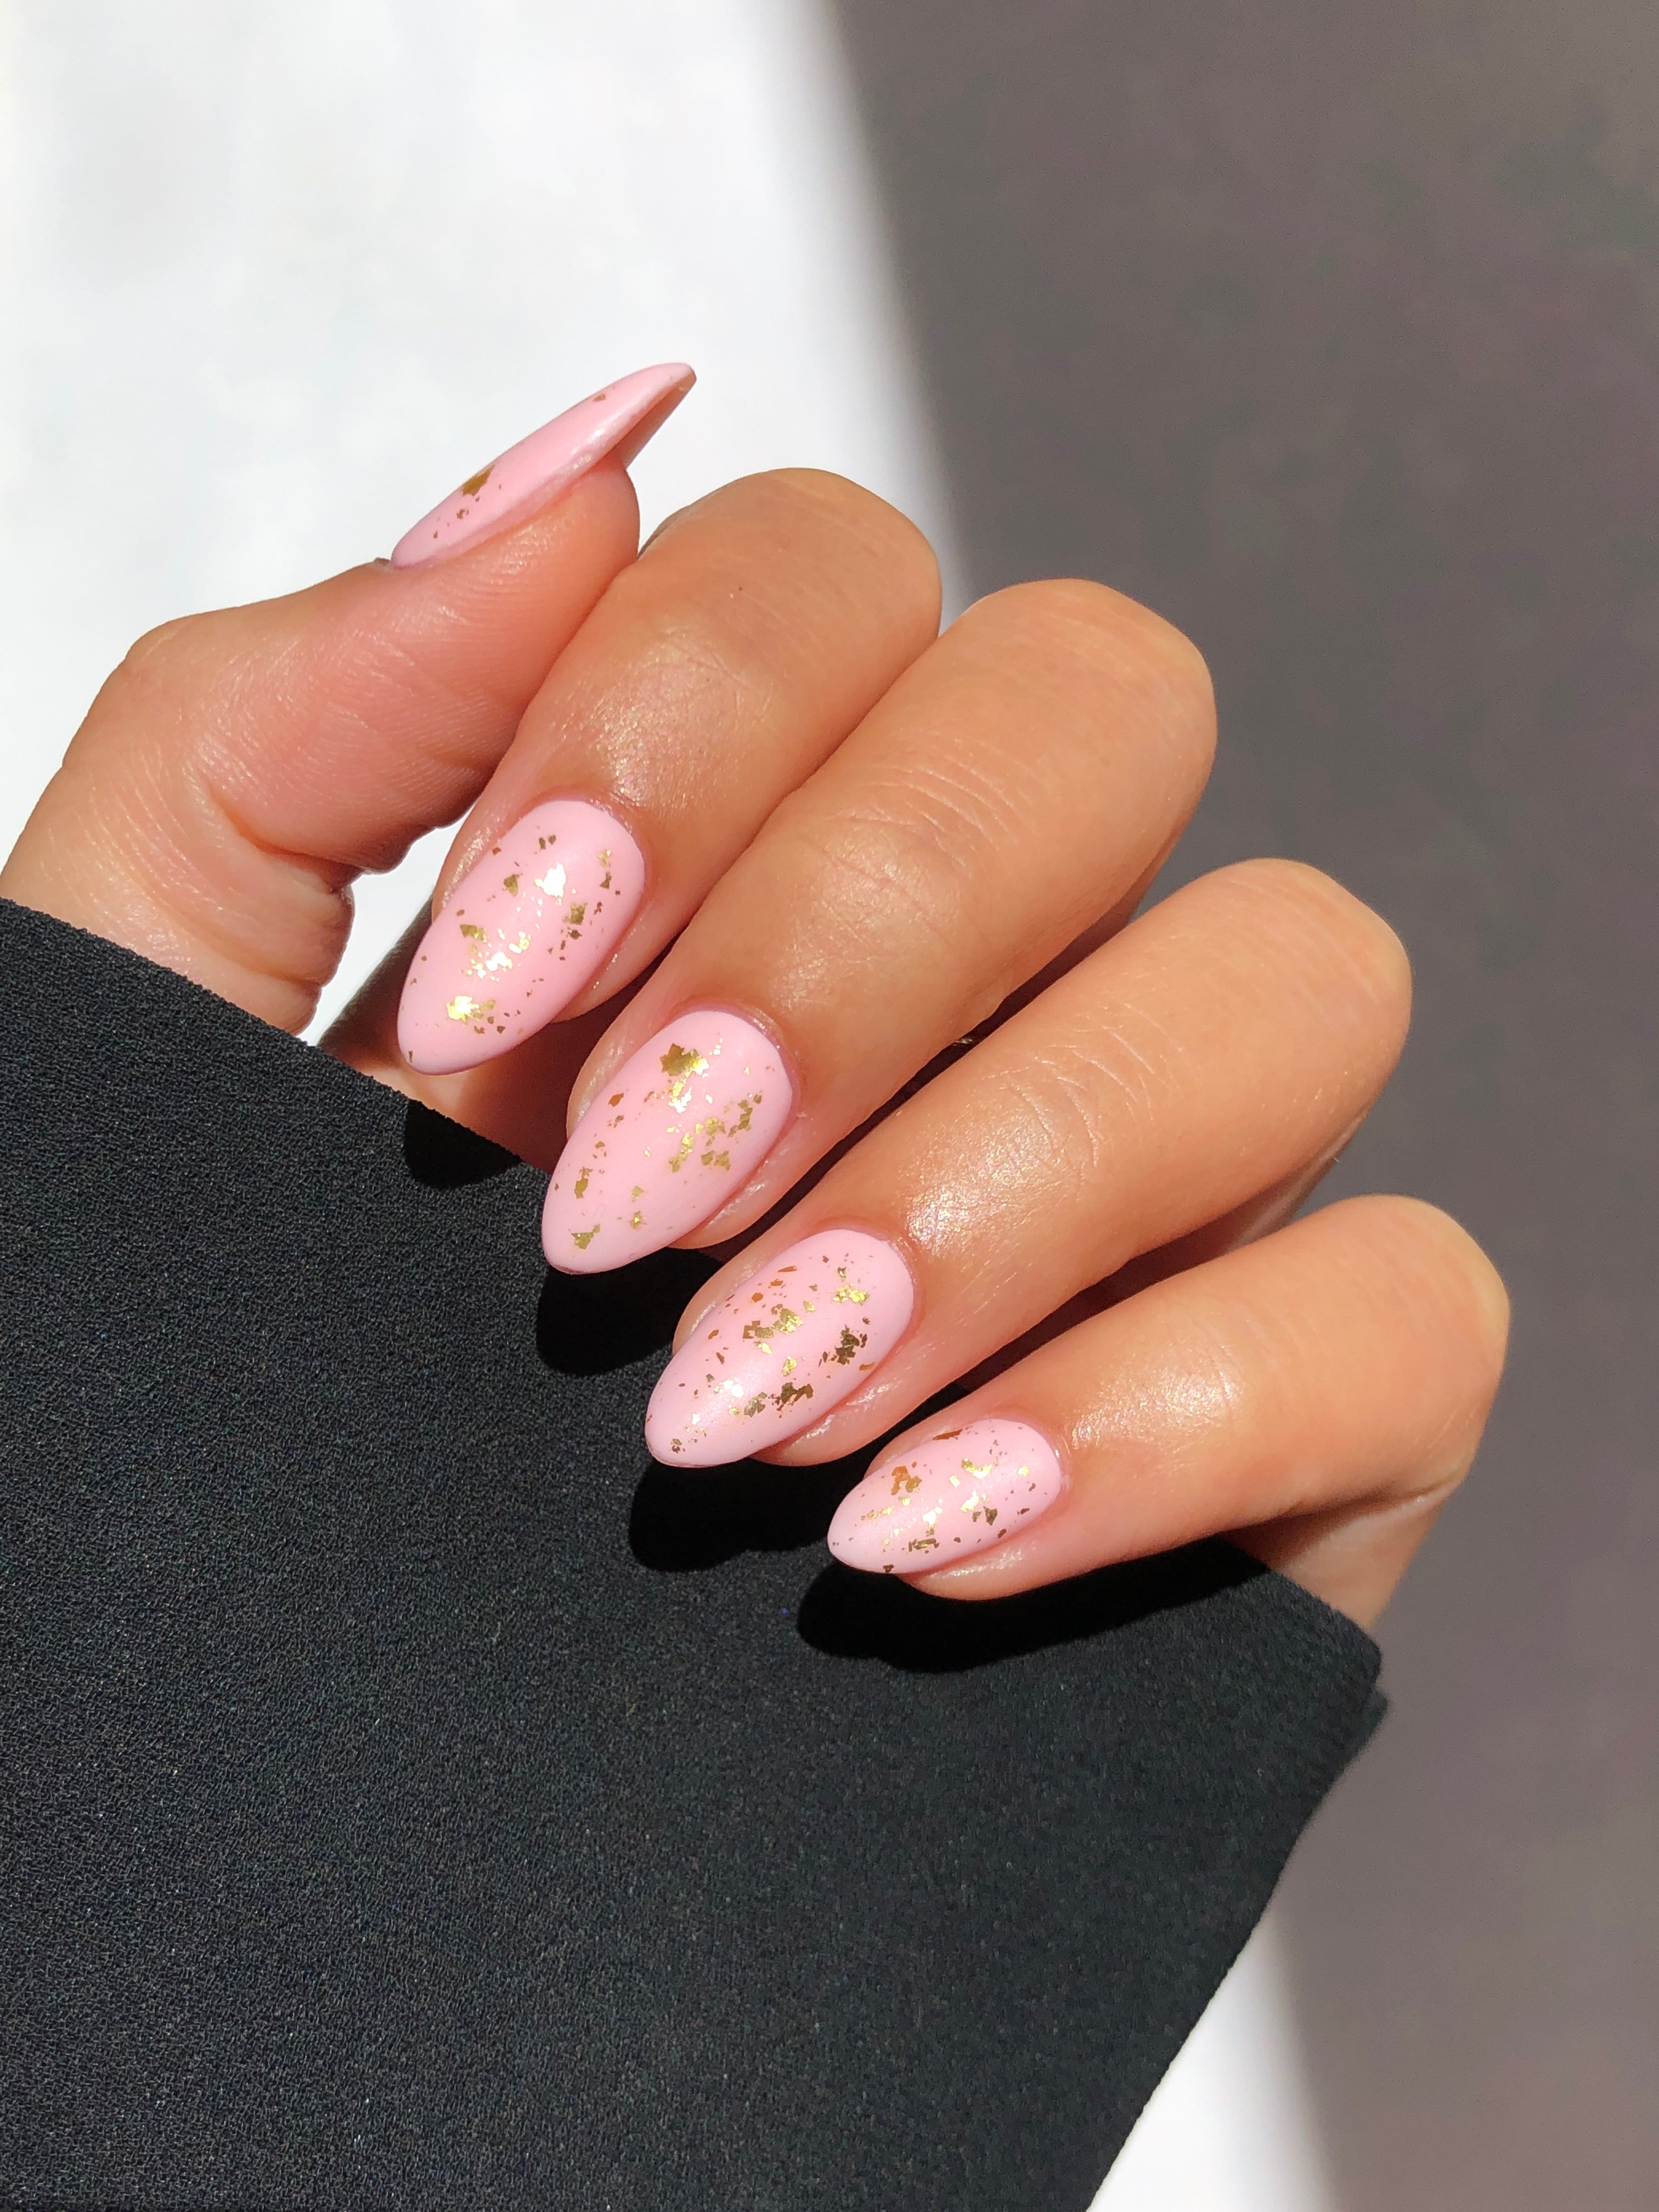 NAIL ART TRENDS YOU NEED TO TRY